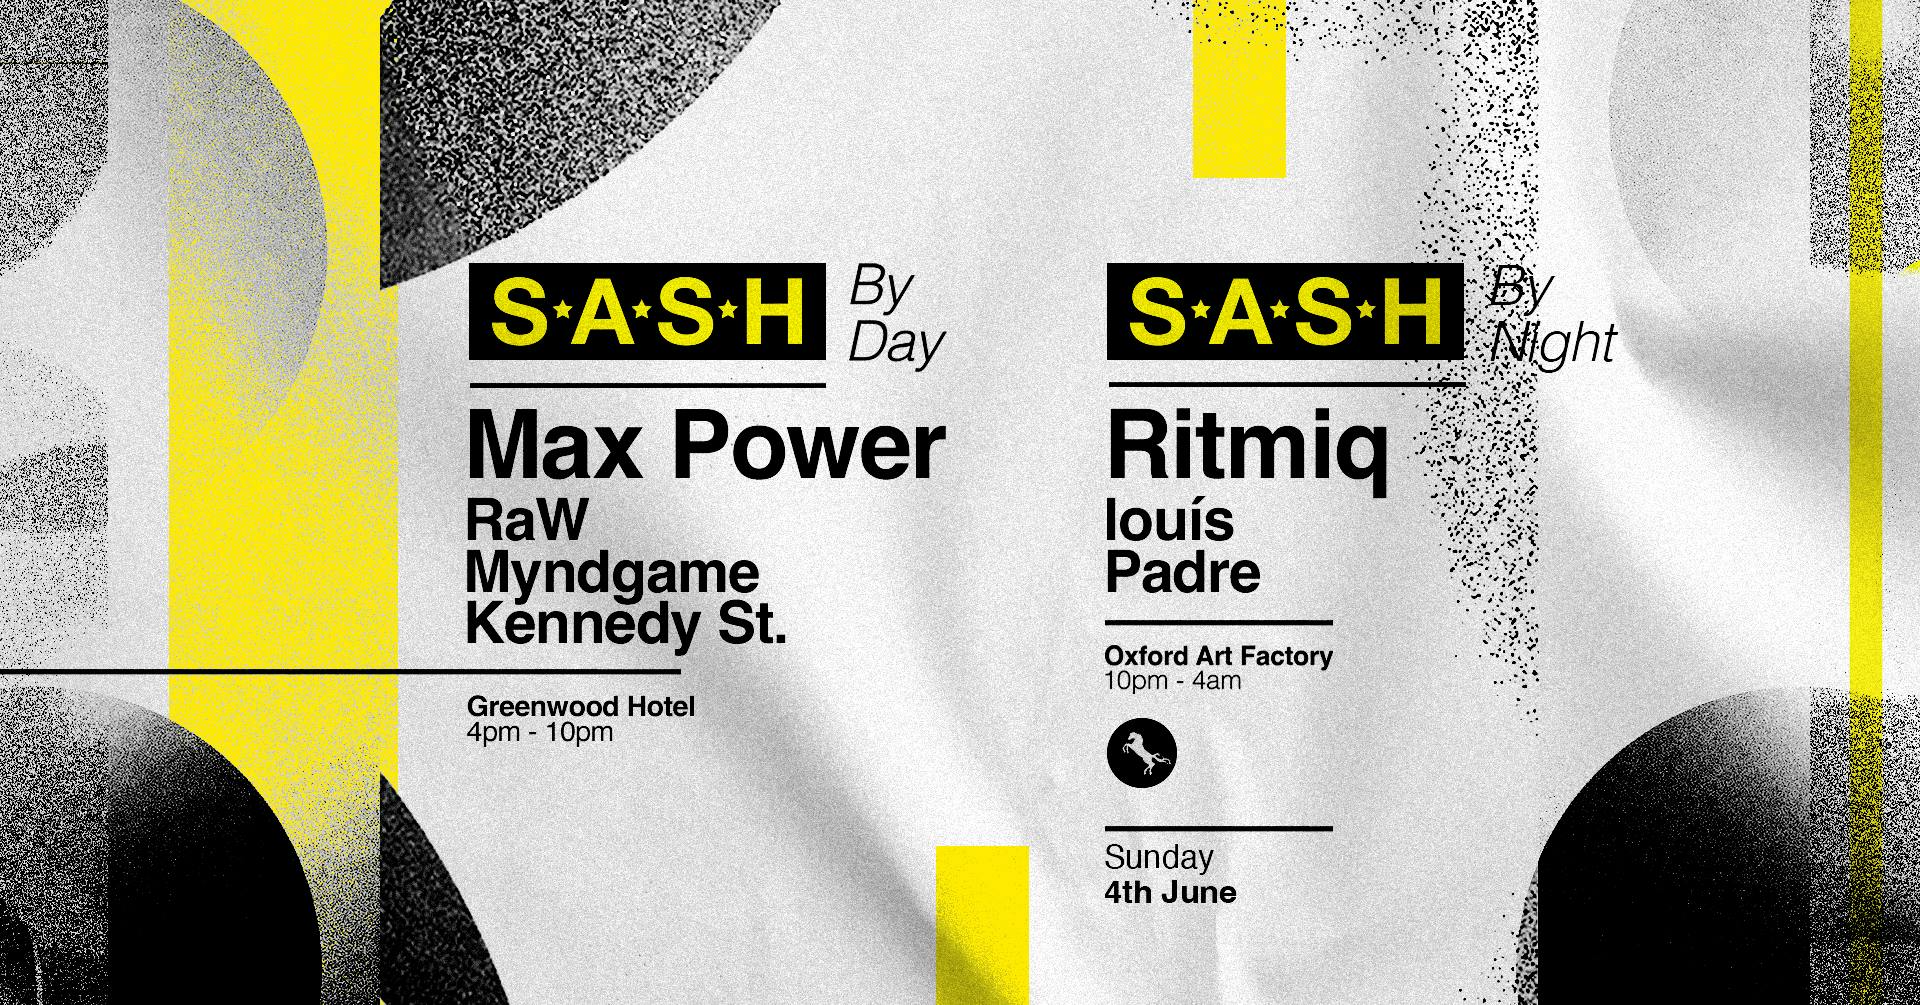 ★ S.A.S.H By Day & Night ★ Max Power ★ Ritmiq ★ Sunday 4th June ★